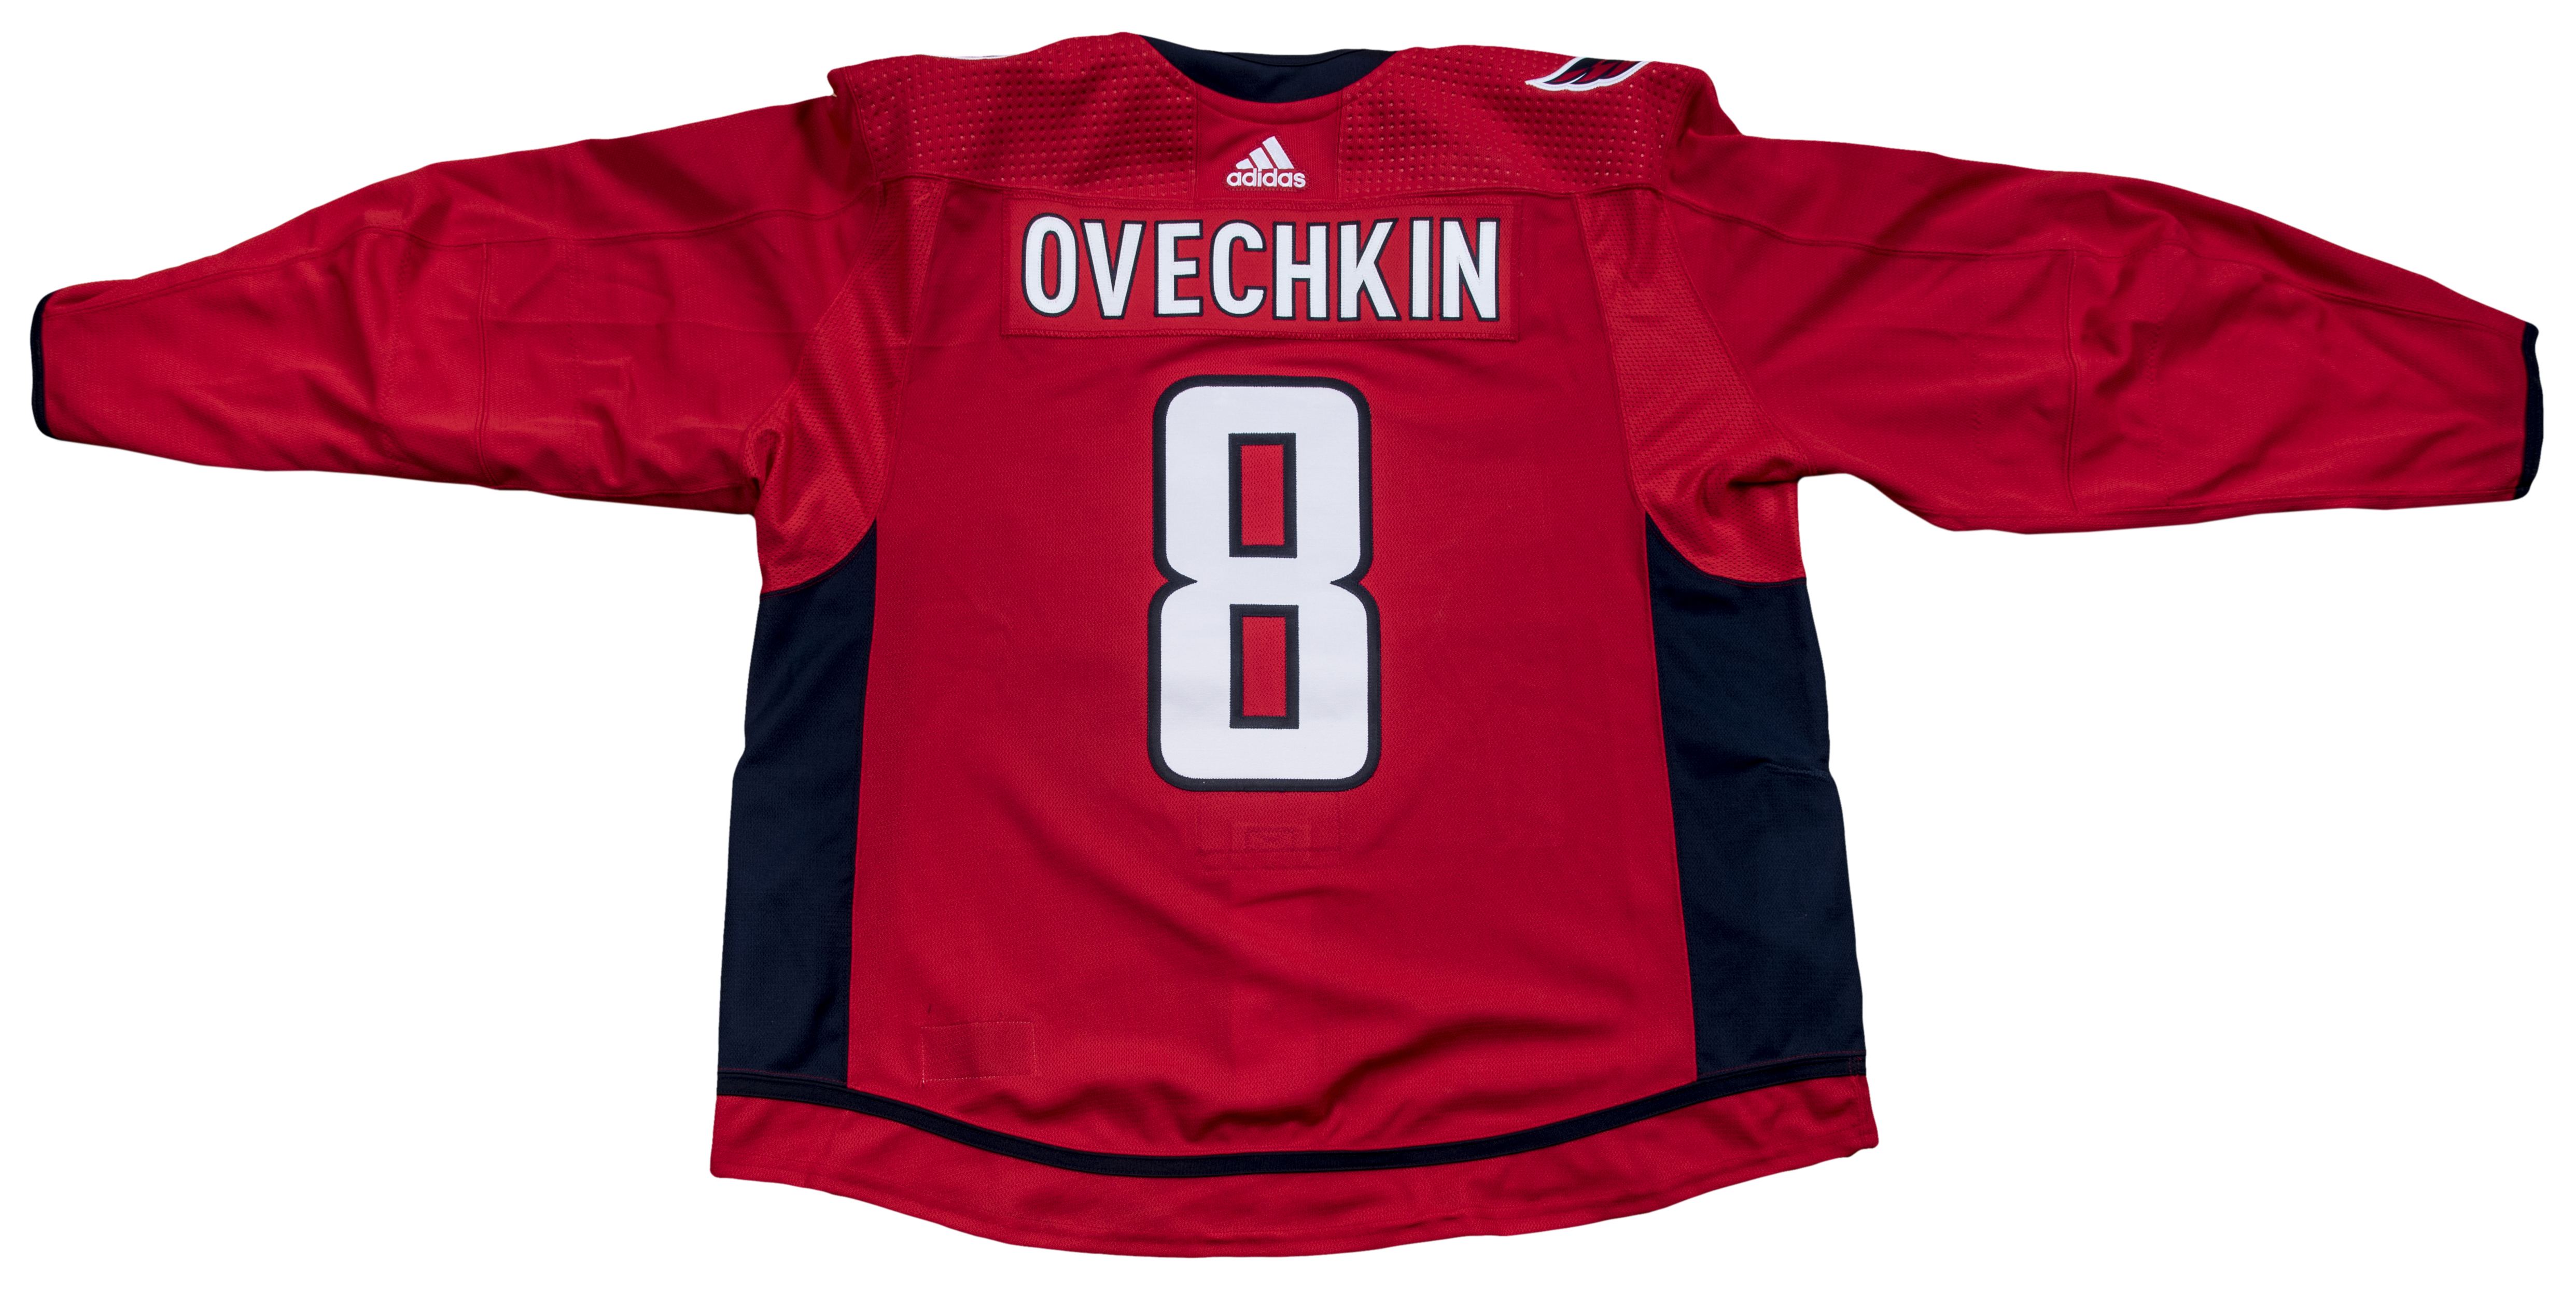 capitals jersey auction